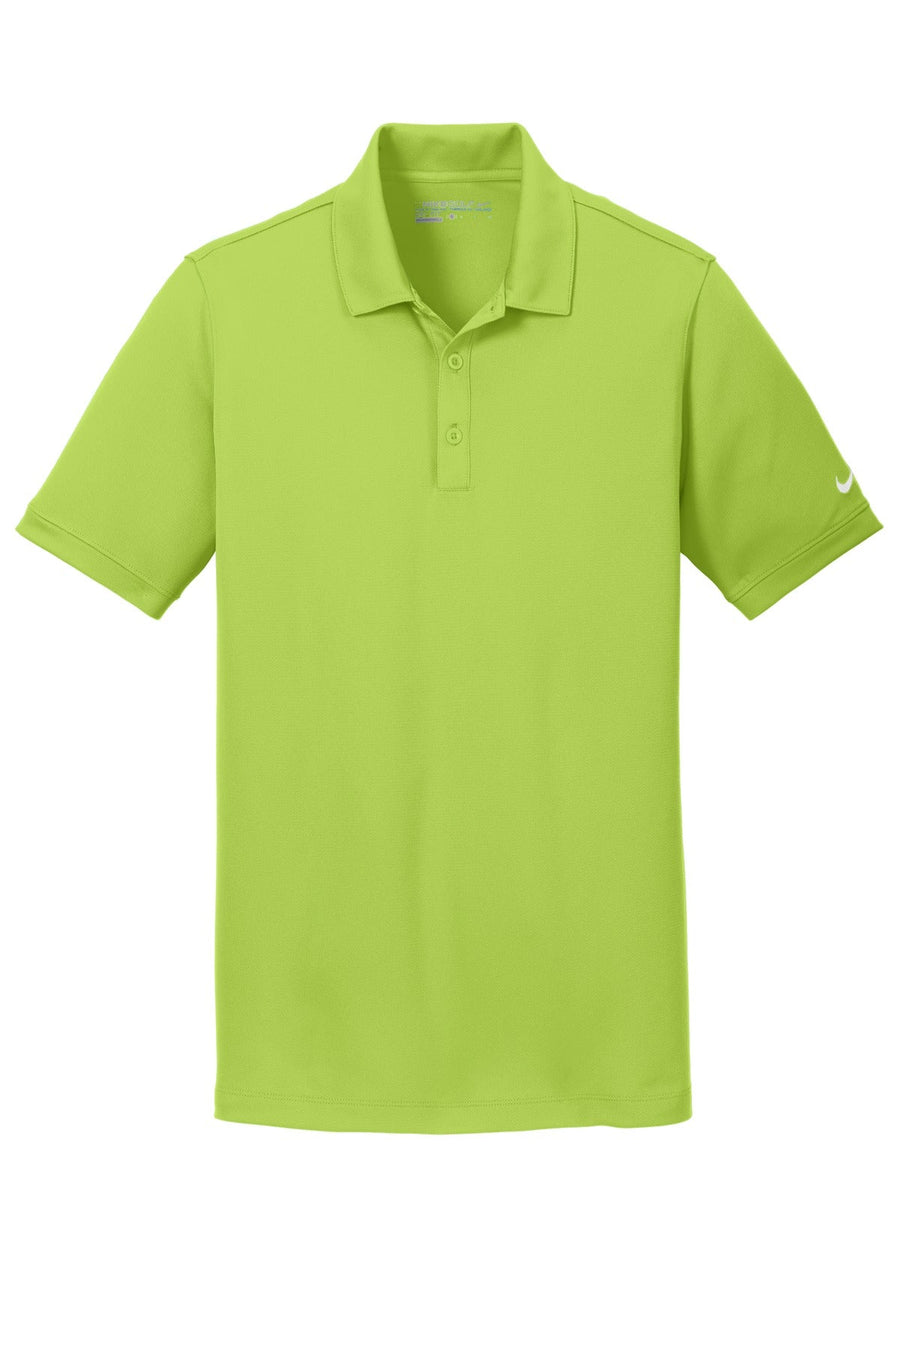 Nike Dri-FIT Solid Icon Pique Modern Fit Polo